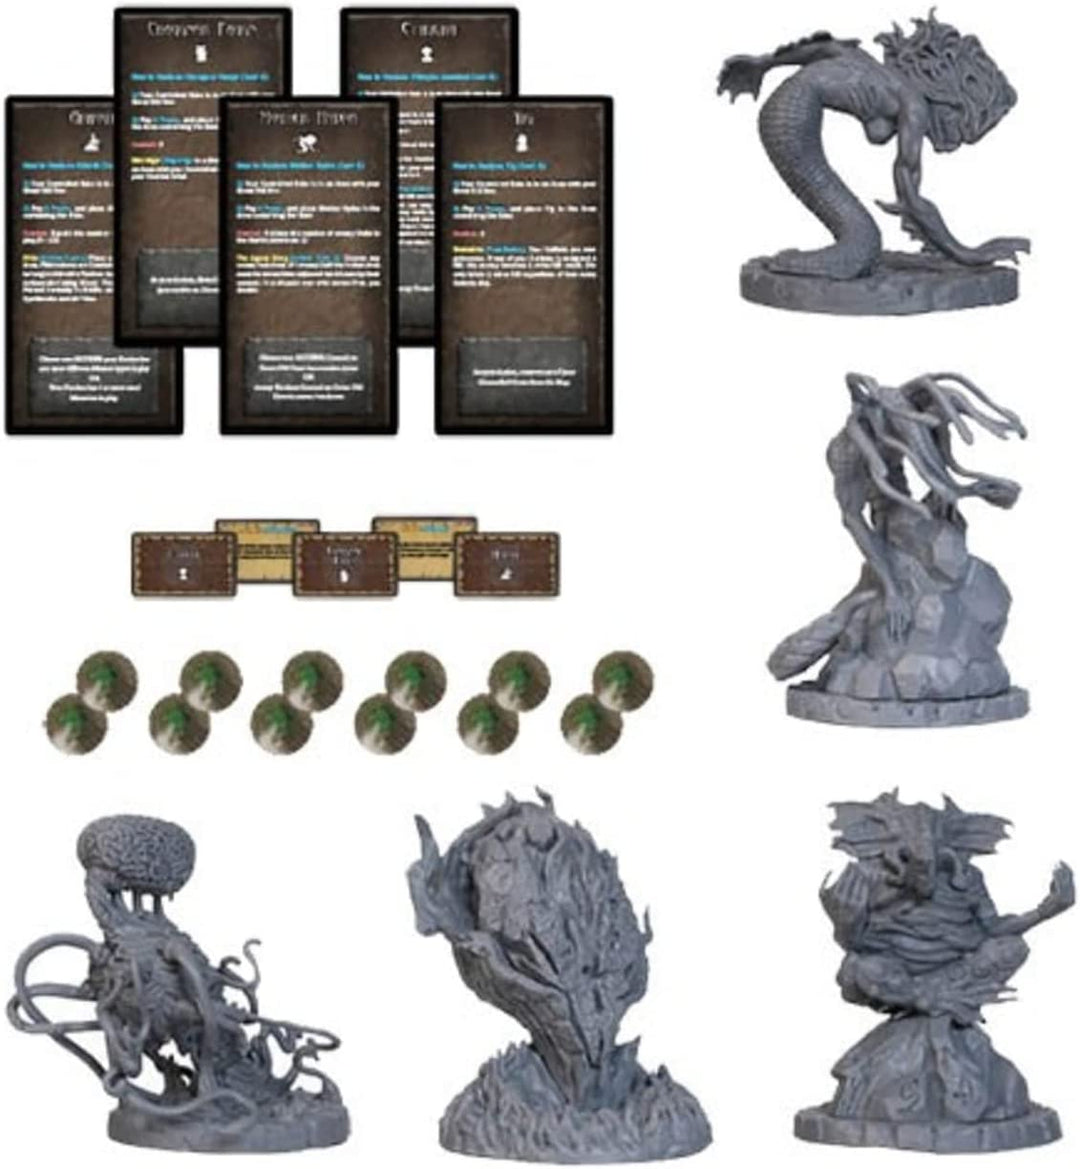 Cthulhu Wars : Great Old One Pack 1